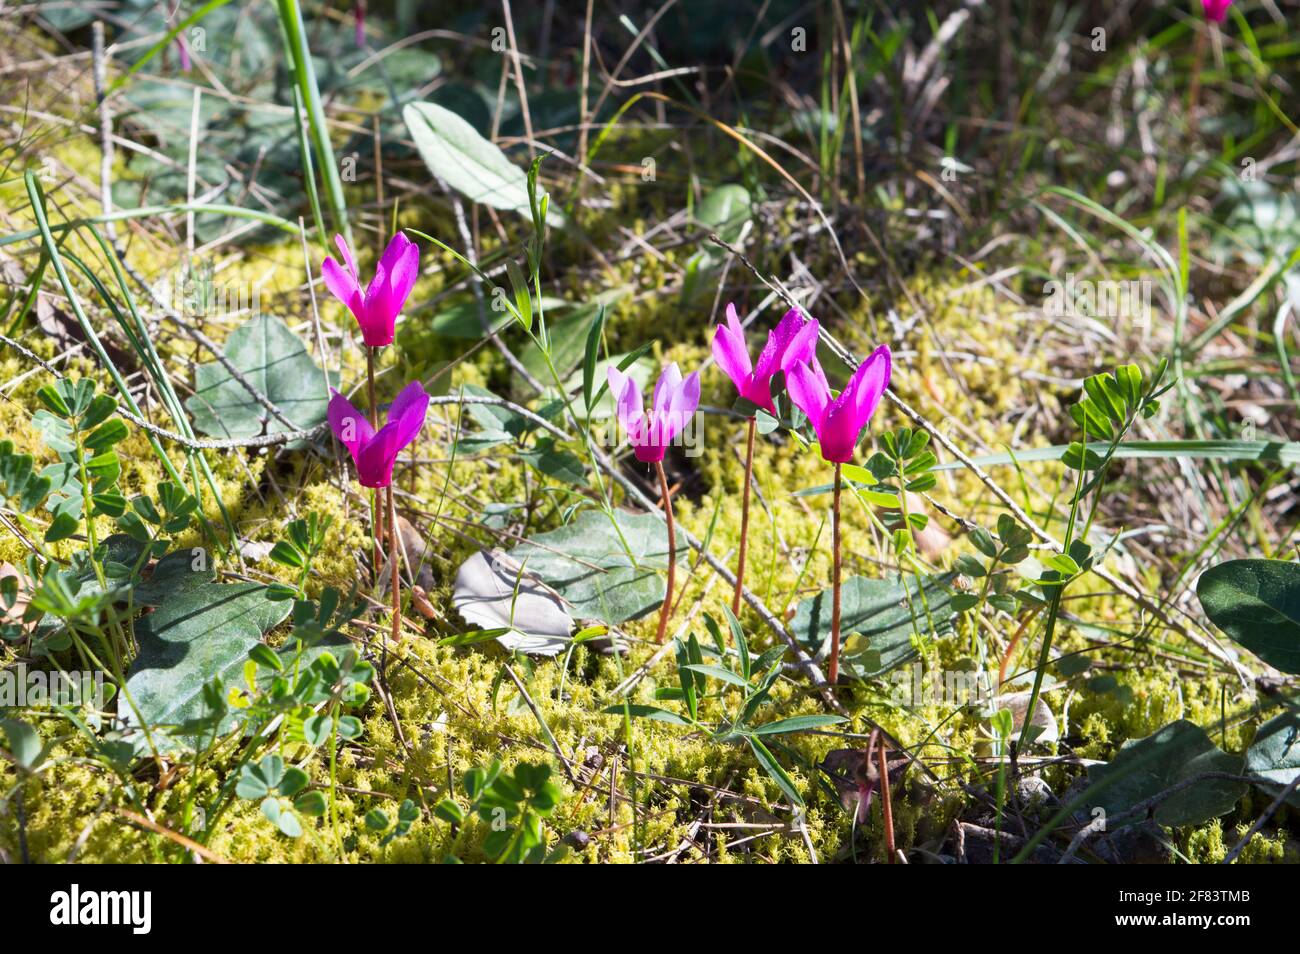 Cyclamen purpurascens, Alpine, European or purple cyclamen in the forest, growing on the moss, during springtime in Croatia Stock Photo